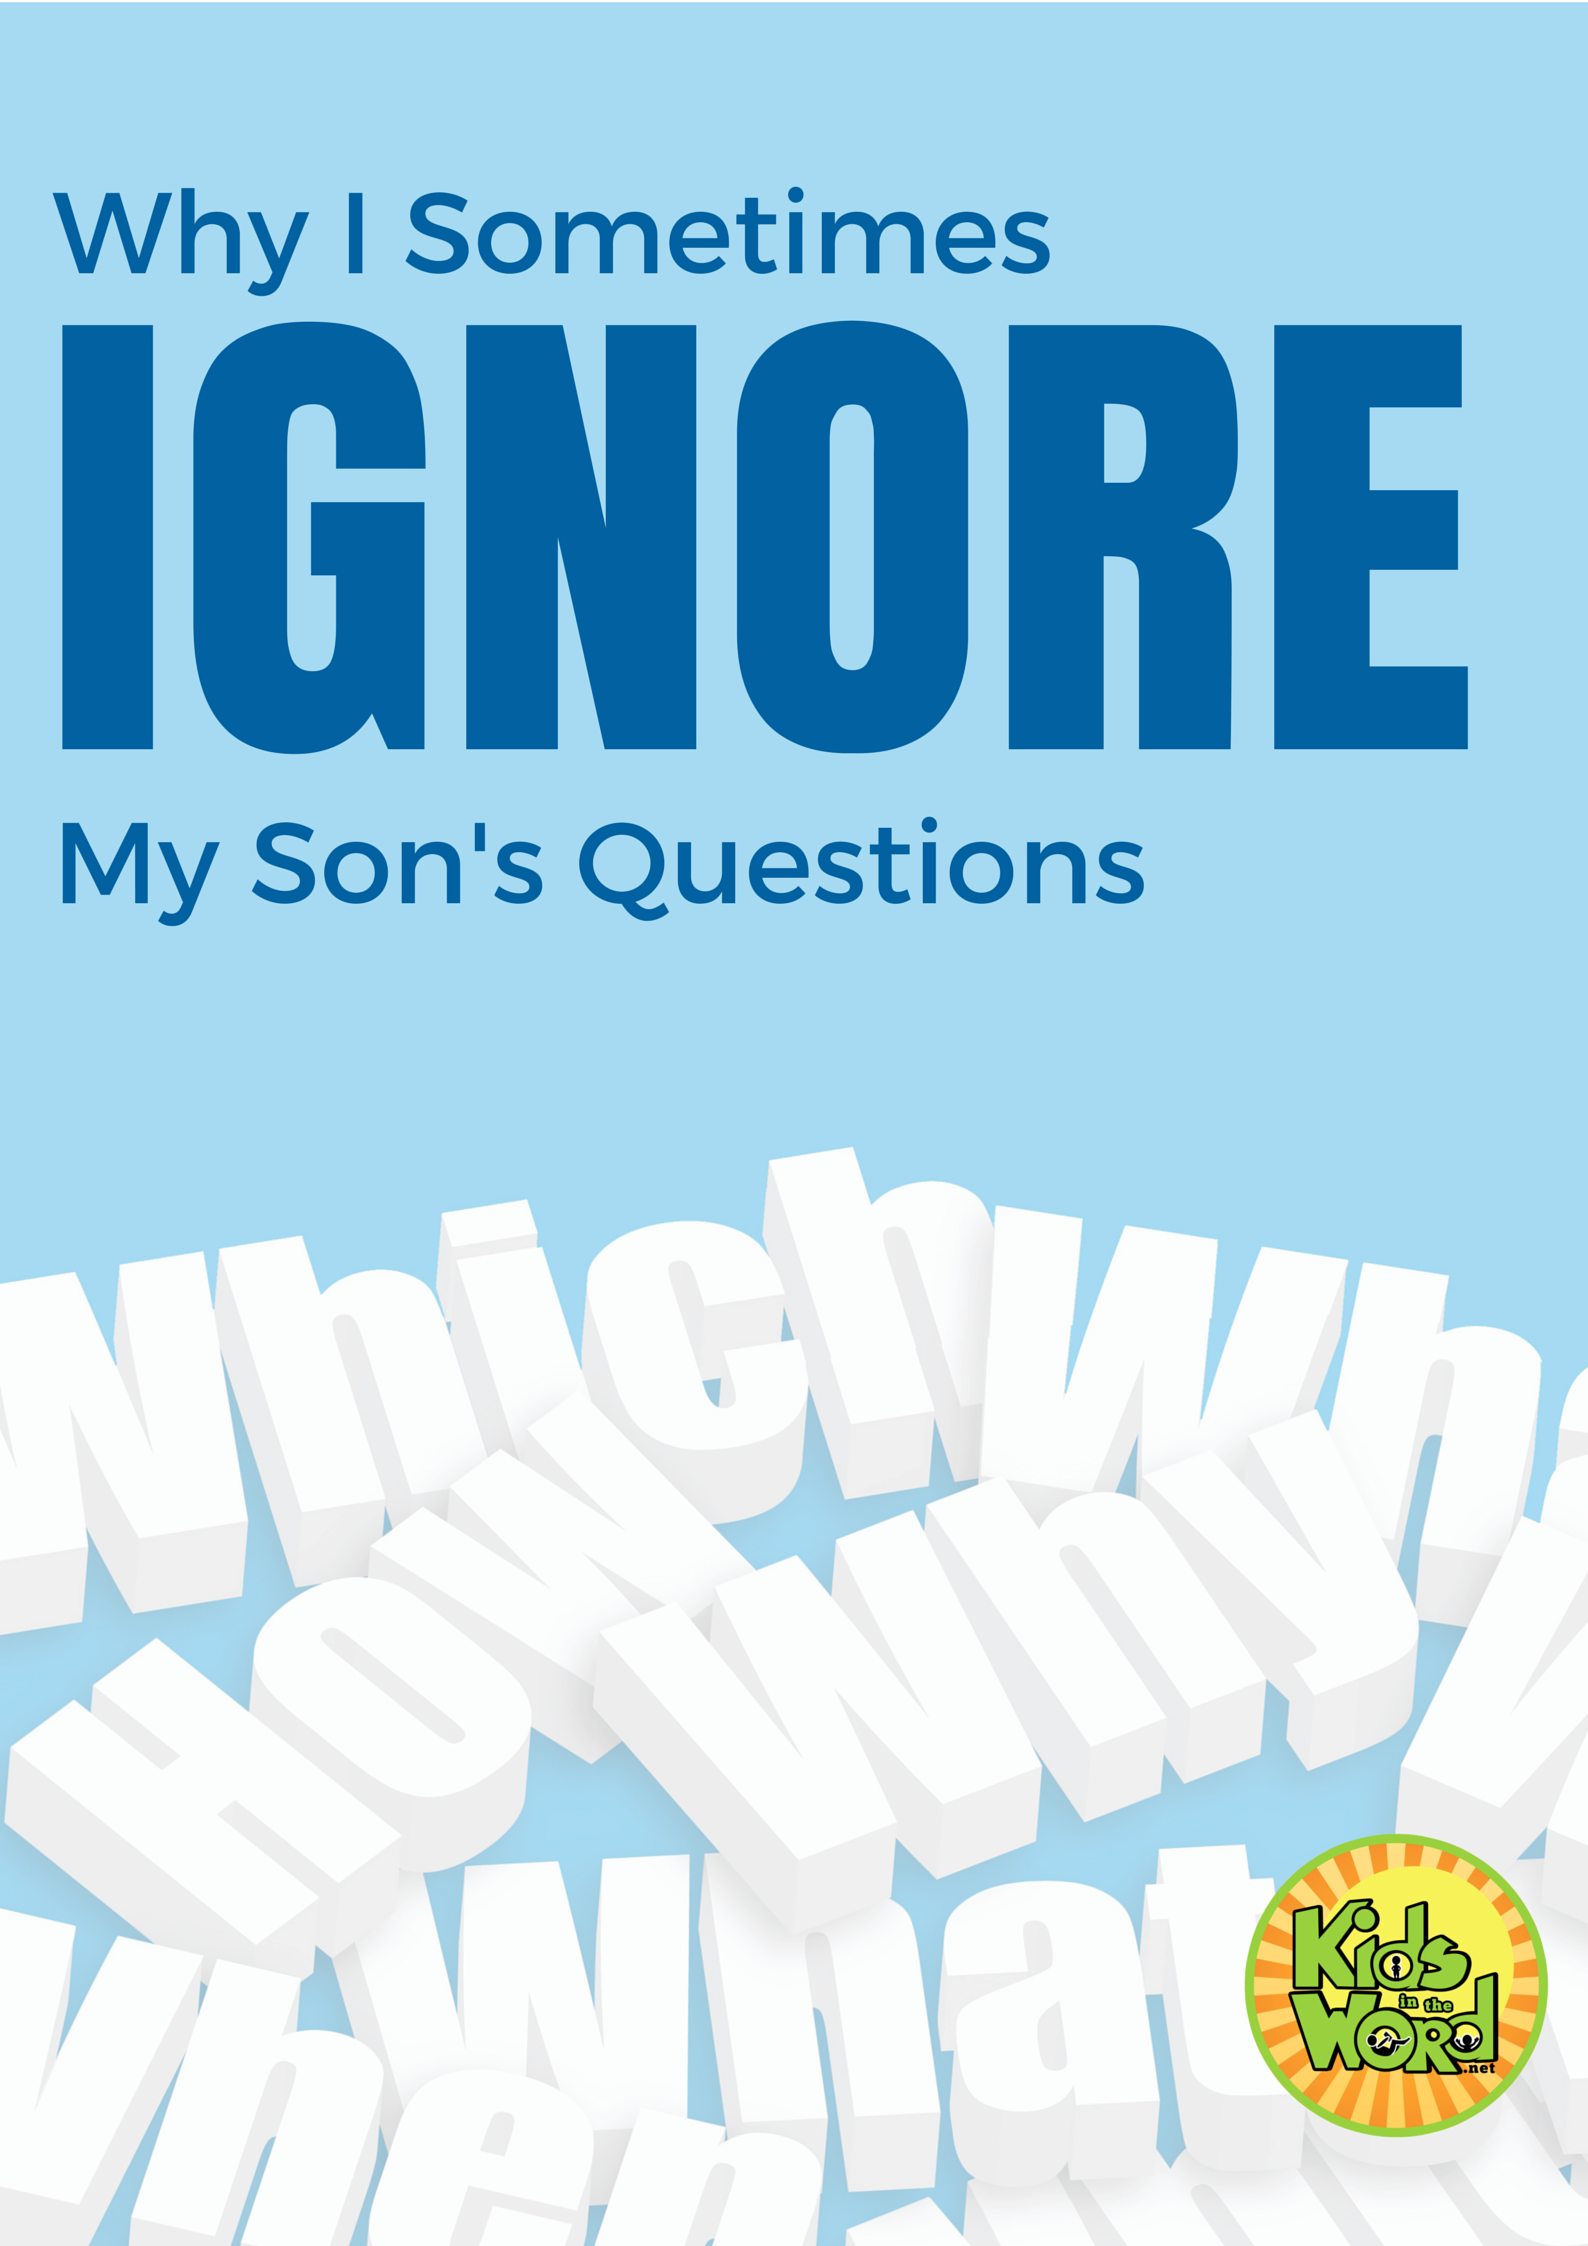 Why I Sometimes Ignore My Son's Questions